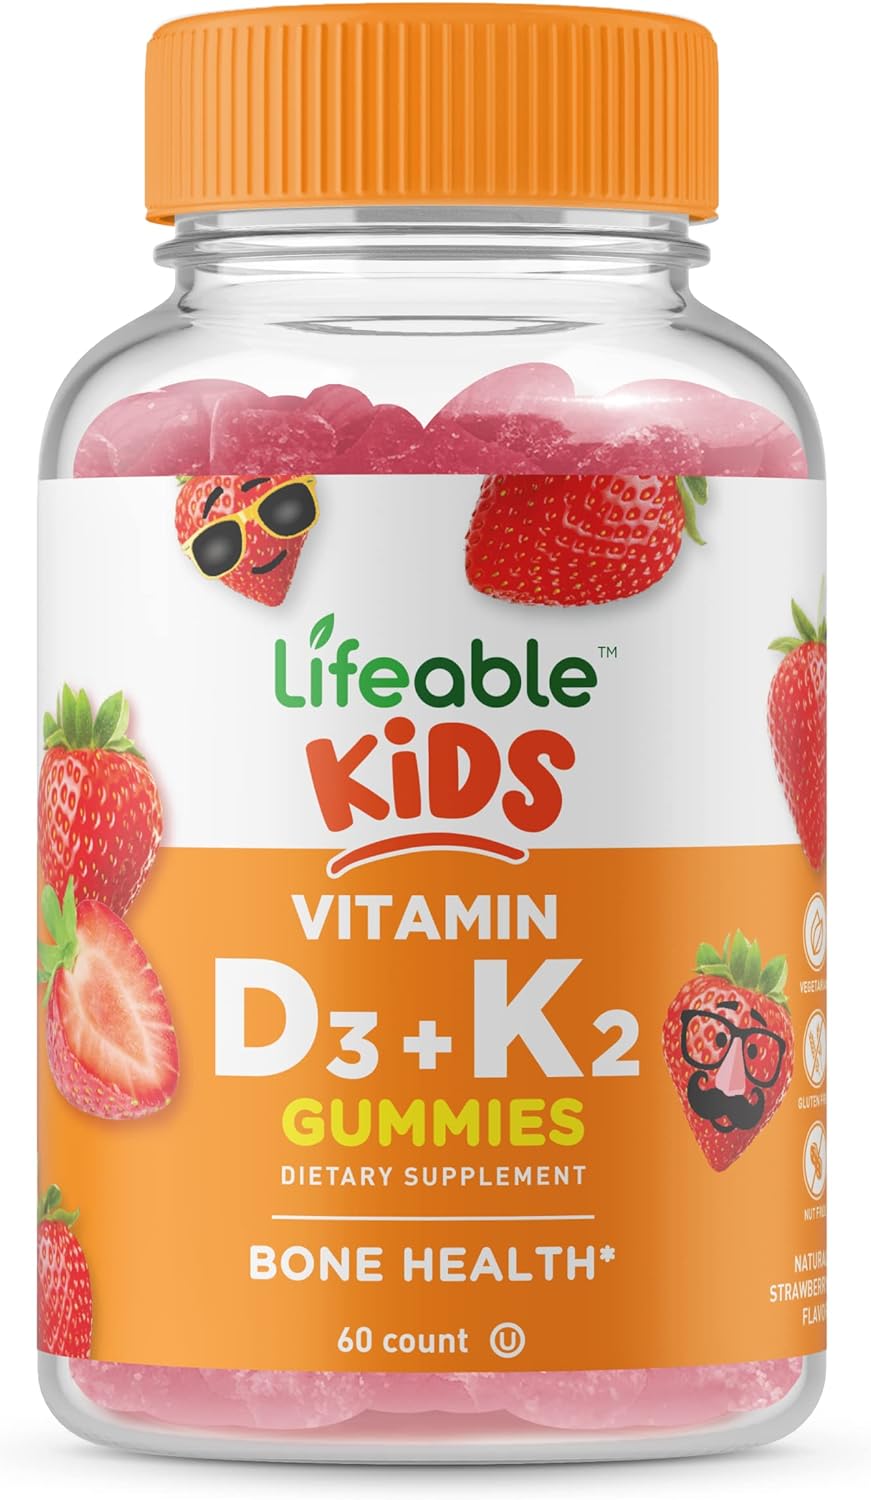 Lifeable Vitamin D3 + K2 - Great Tasting Natural Flavor Gummy Supplement Vitamins - Gluten Free Vegetarian and Non-GMO Chewable - for Strong and Healthy Bones - 60 Gummies (Kids)